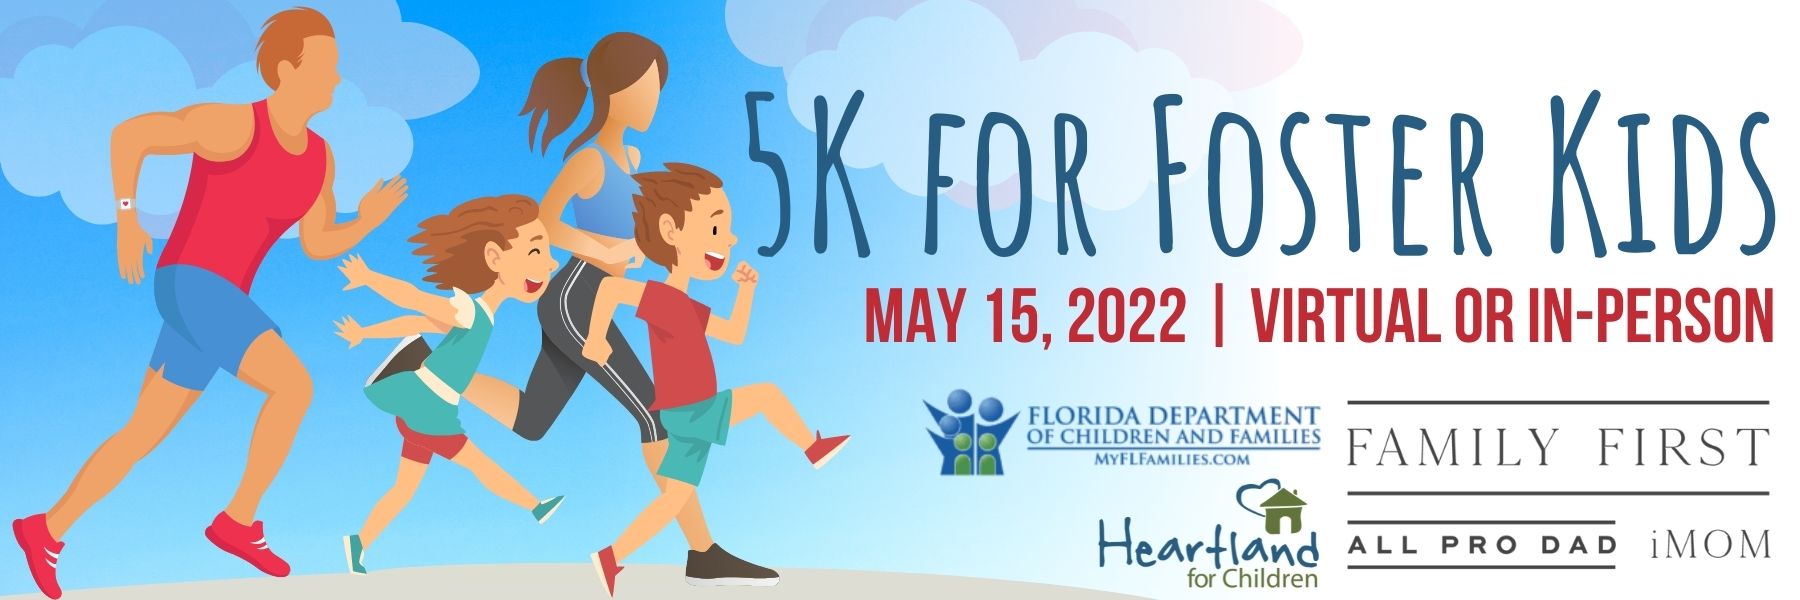 All Pro Dad - 5K for Foster Kids